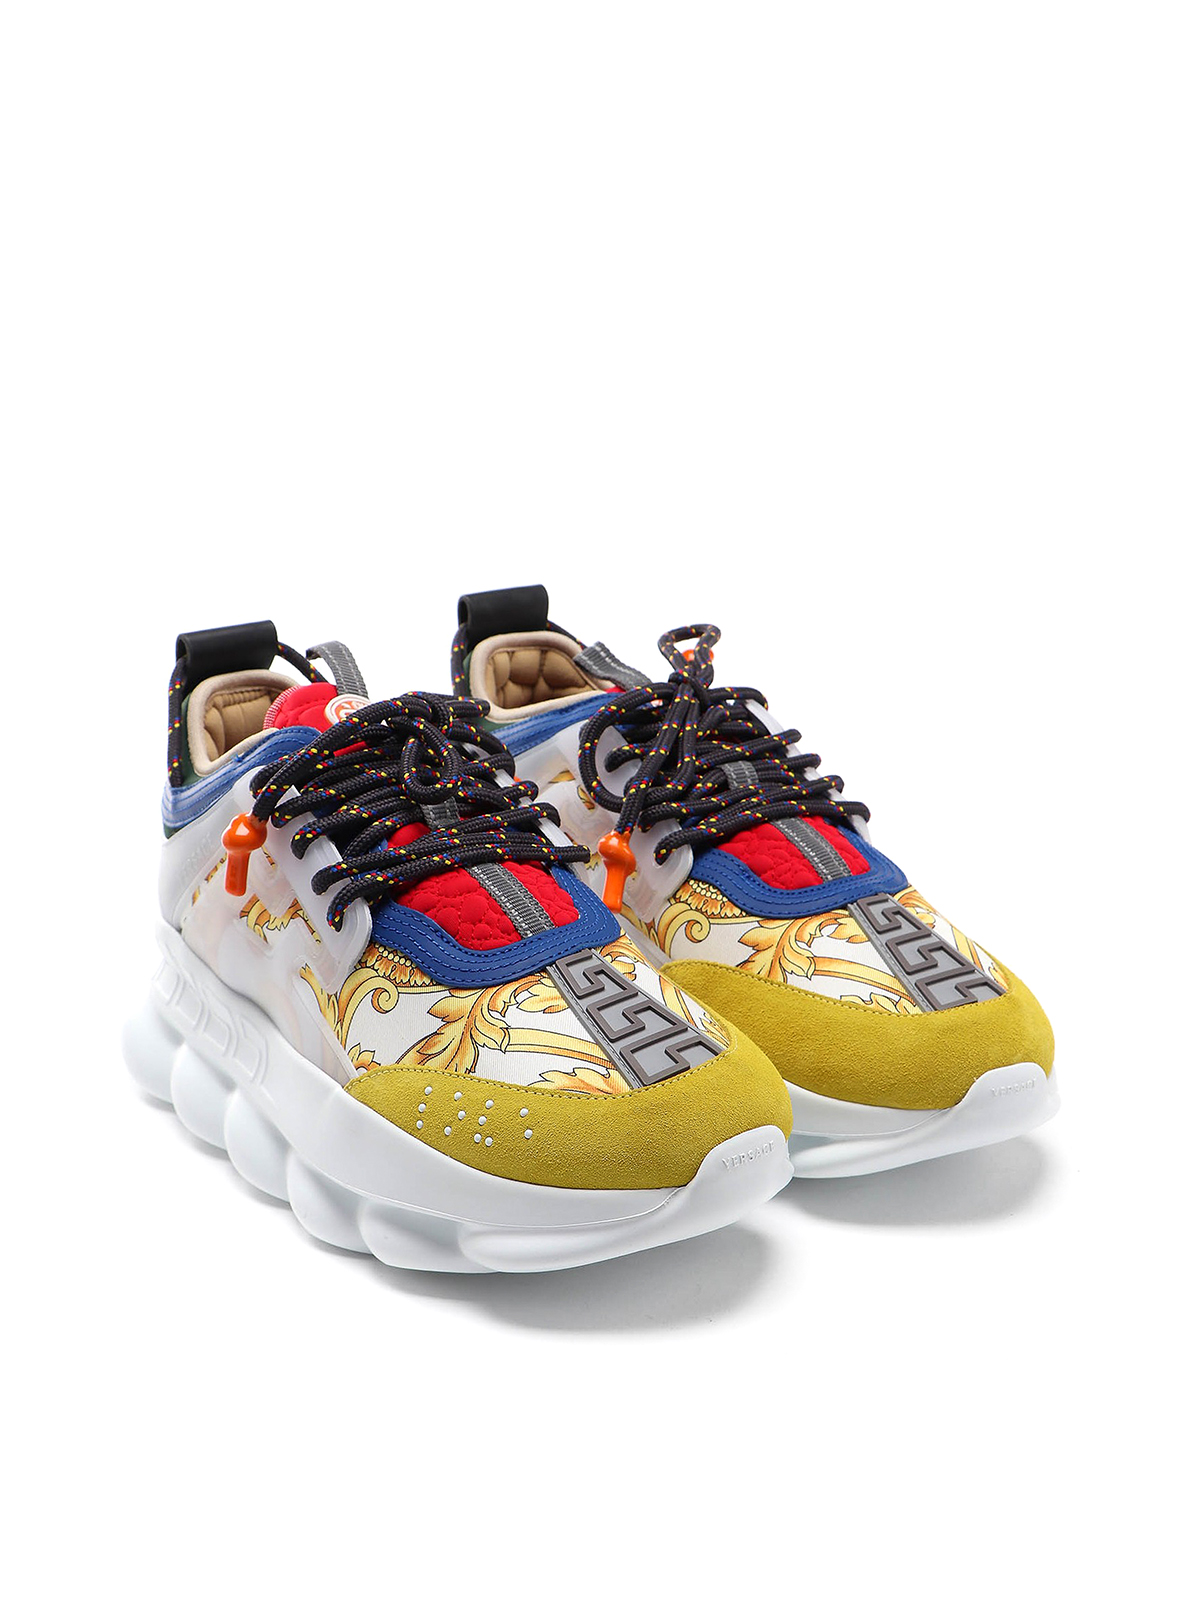 VERSACE - CHAIN ​​REACTION SNEAKERS WITH FLORAL PRINT - Eleonora Bonucci